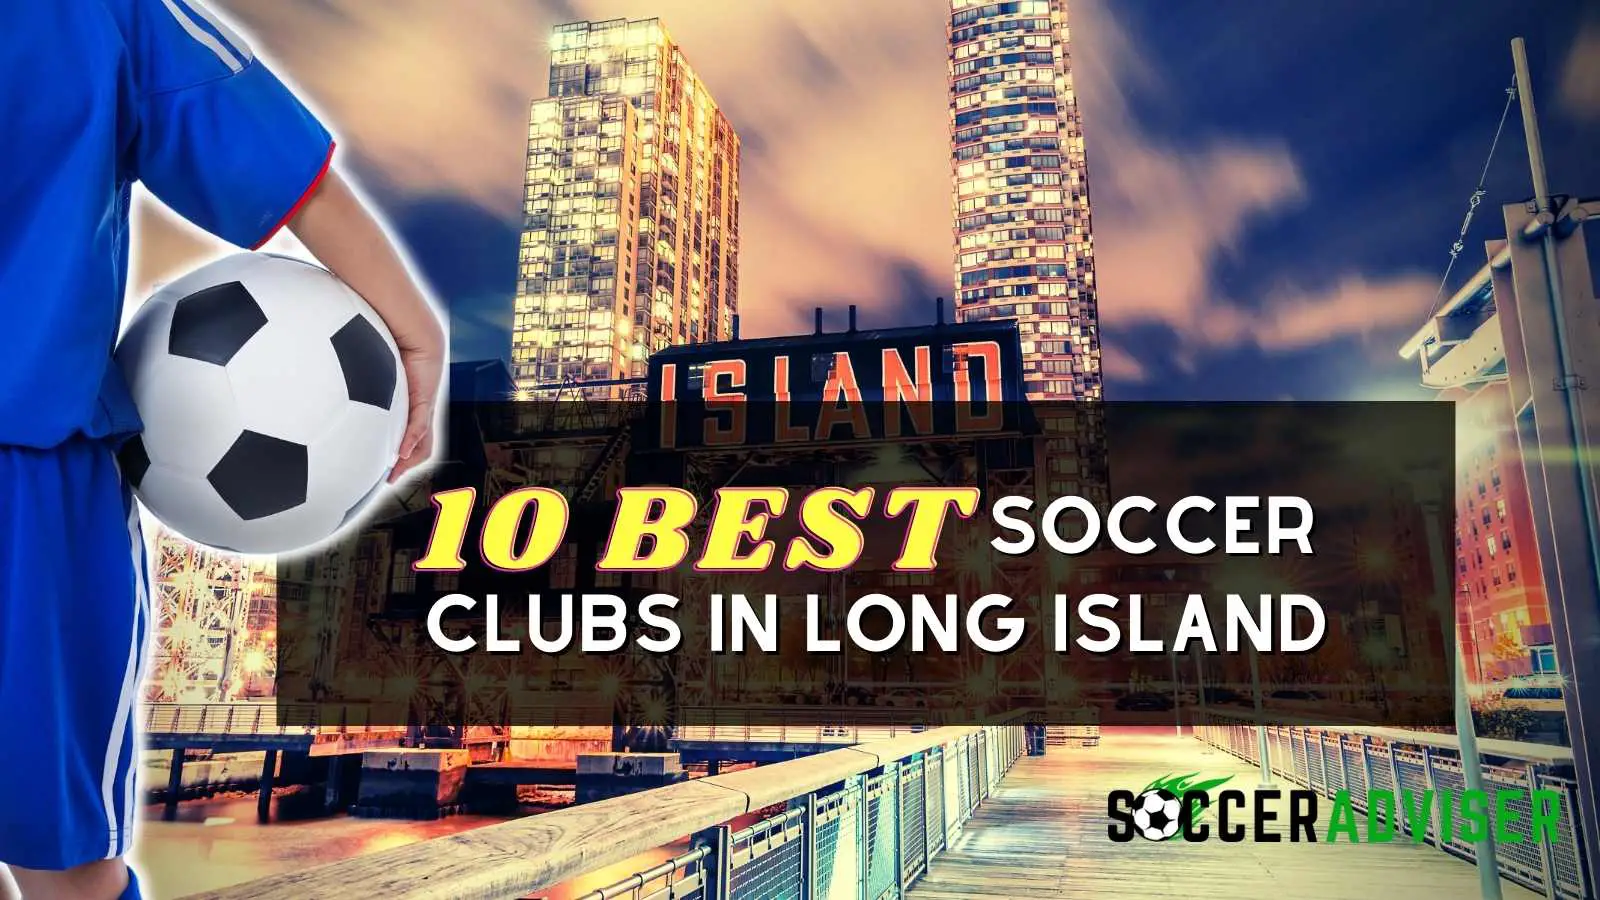 The 10 Best Soccer Clubs in Long Island – (2022) Guide